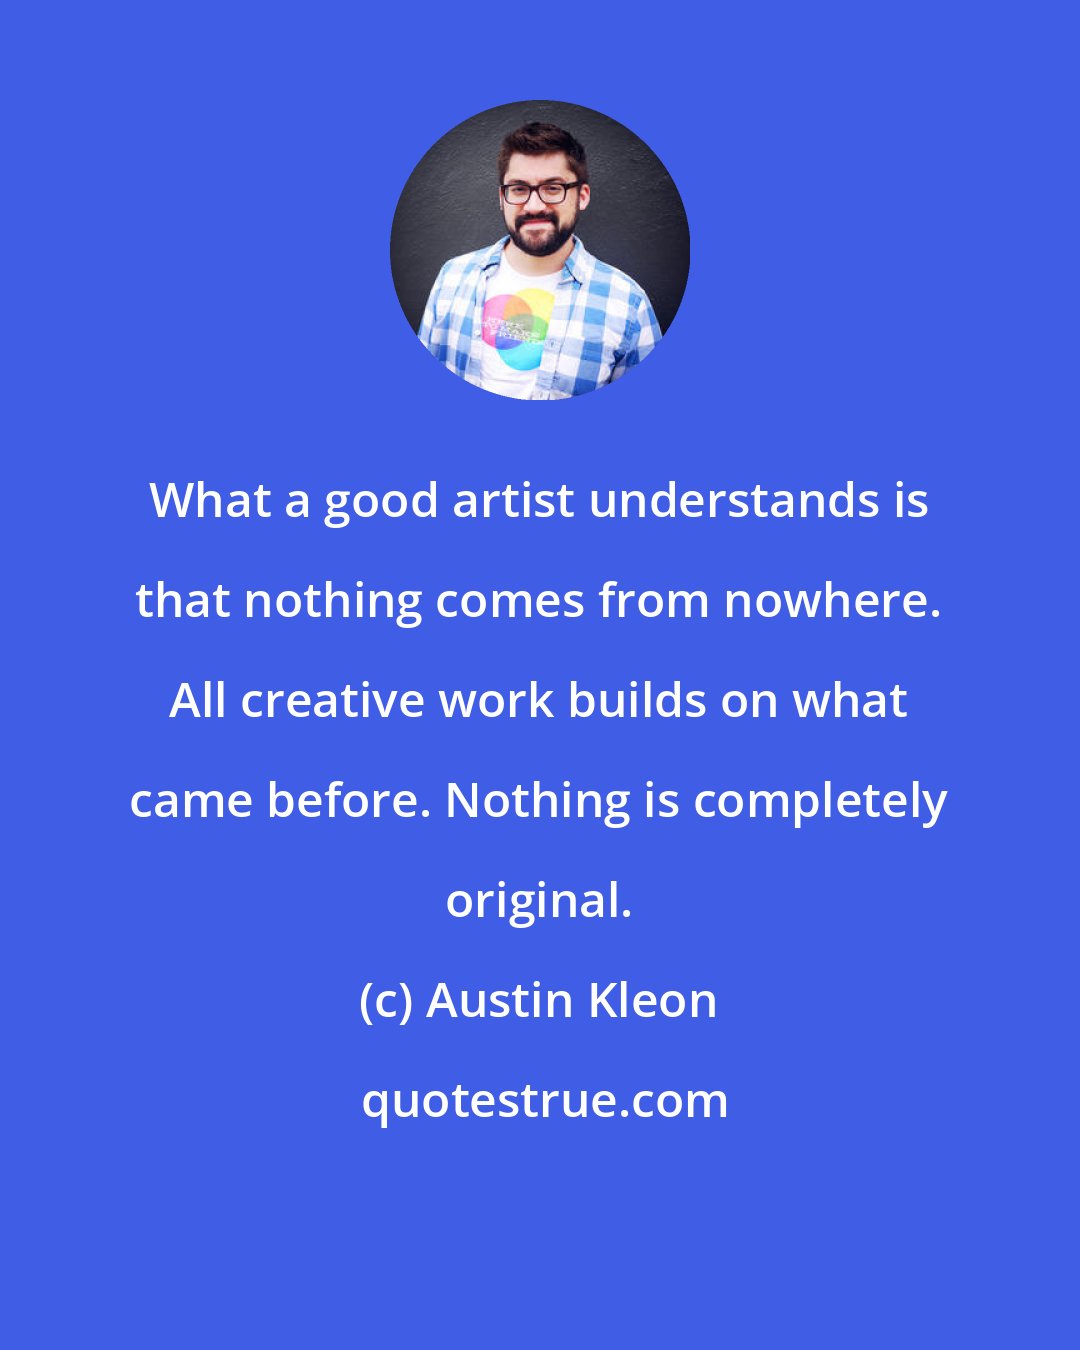 Austin Kleon: What a good artist understands is that nothing comes from nowhere. All creative work builds on what came before. Nothing is completely original.